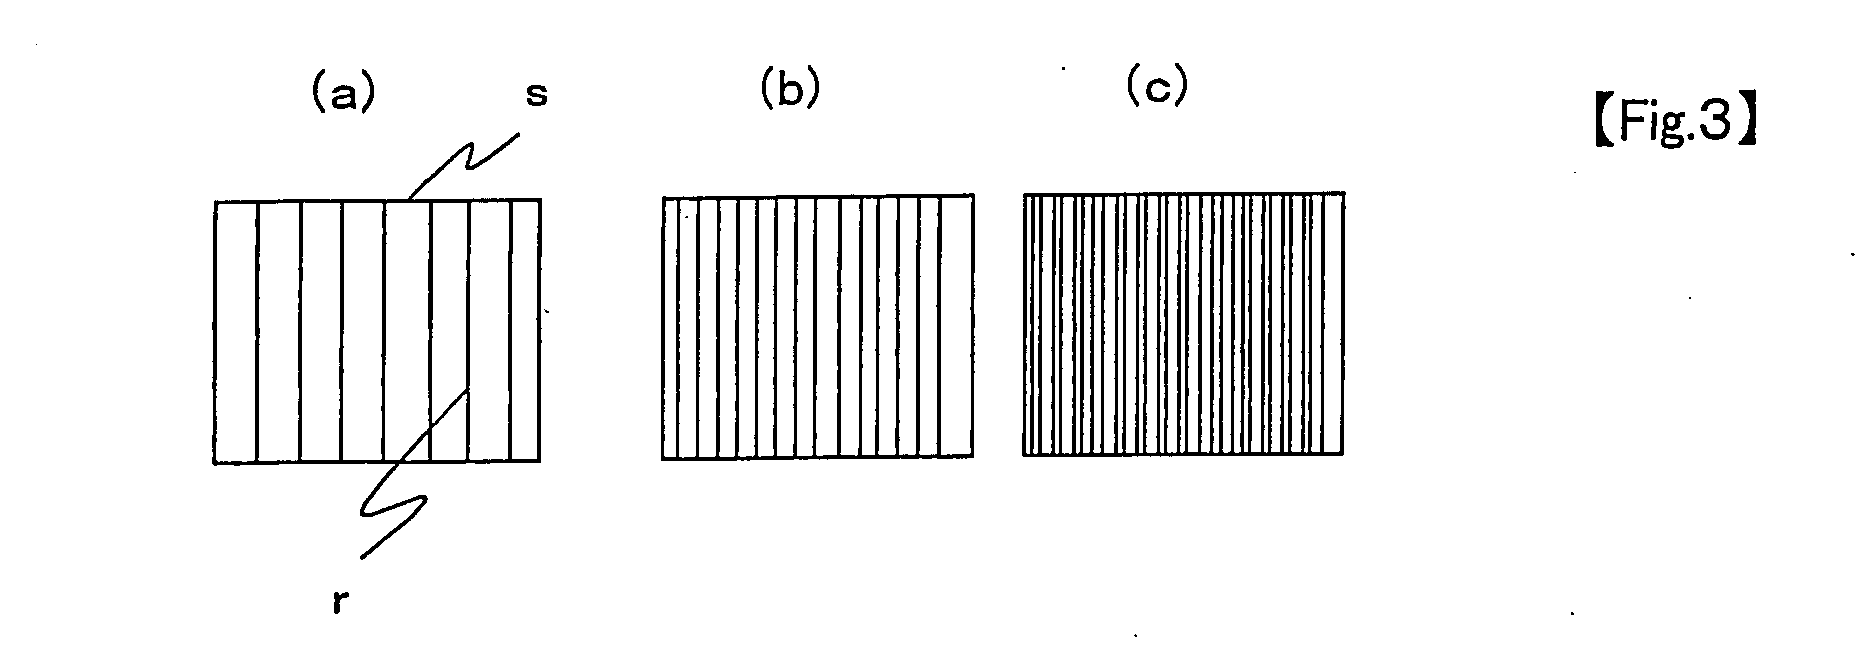 Image forming apparatus and method for controlling image density thereof